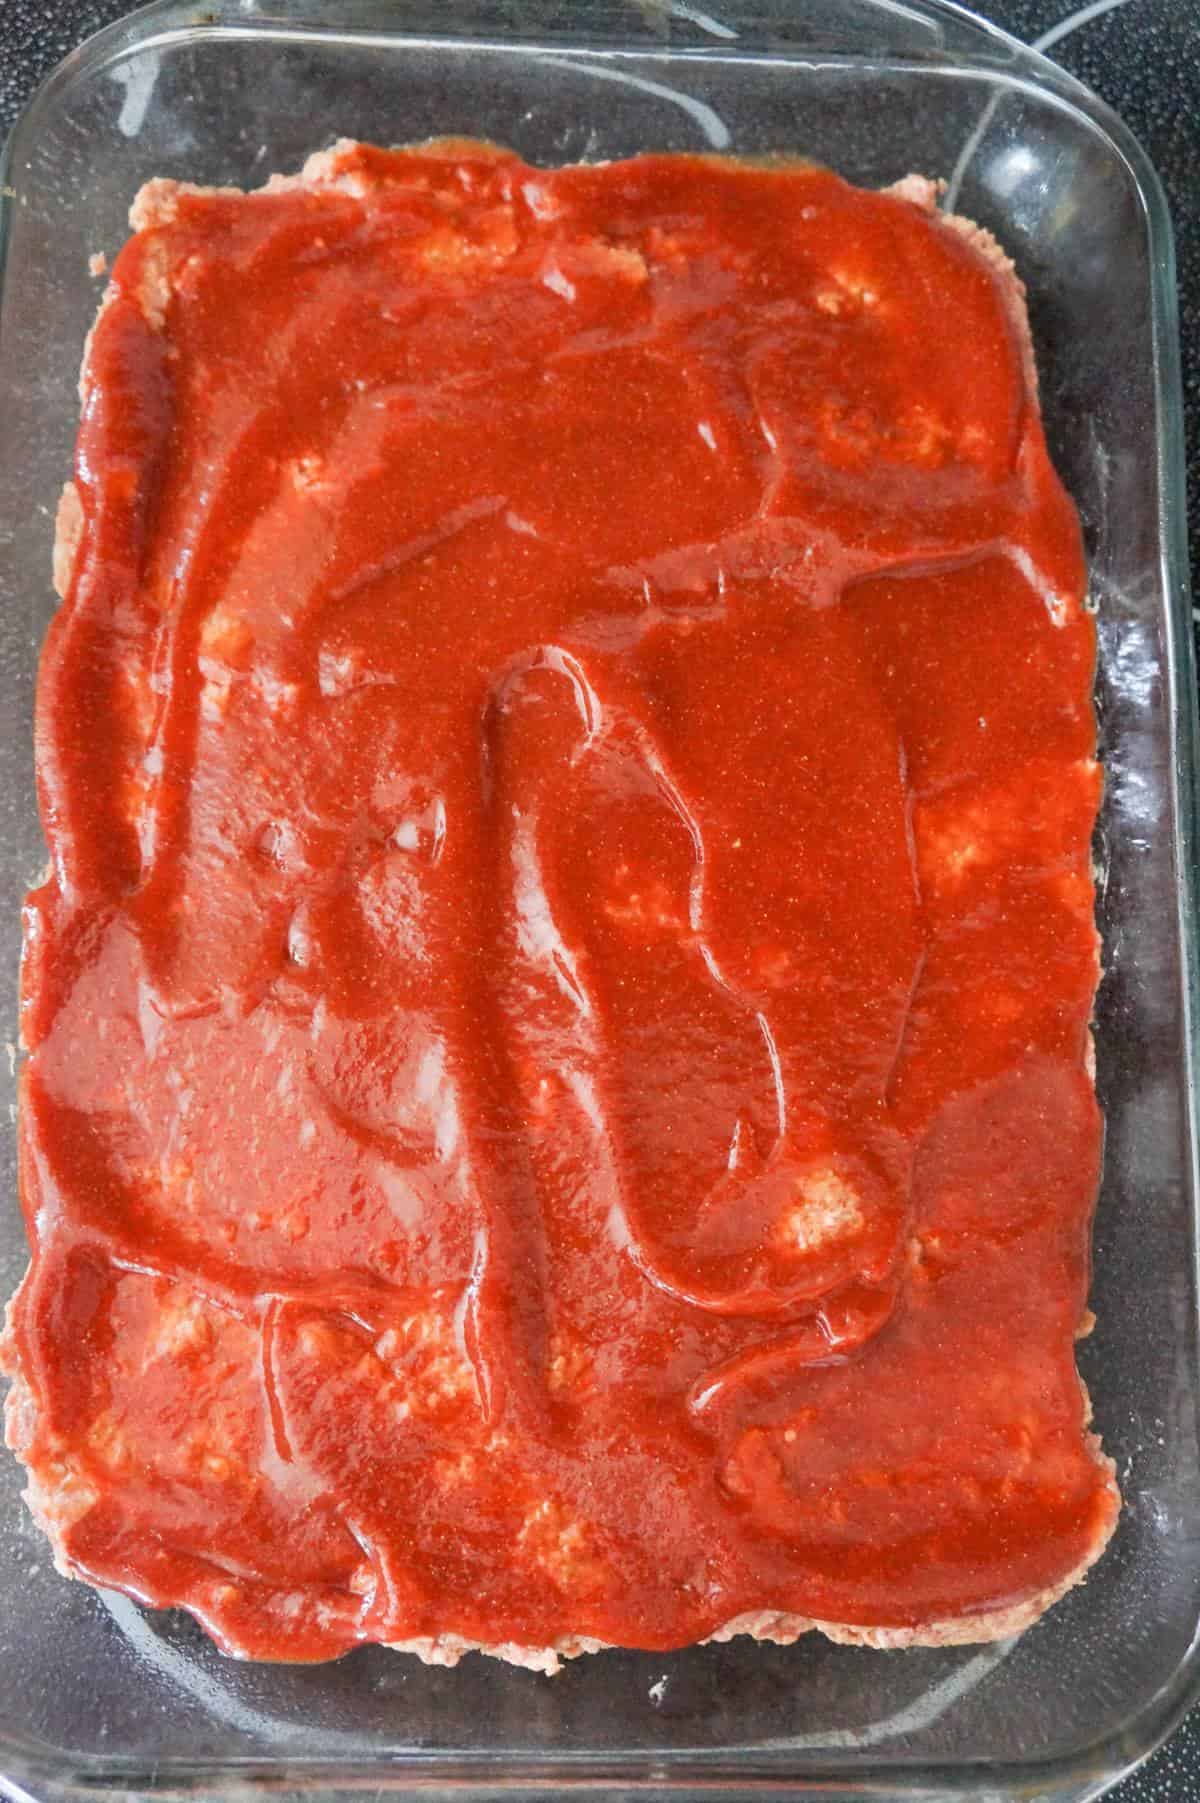 ketchup glaze on a meatloaf casserole in a baking dish